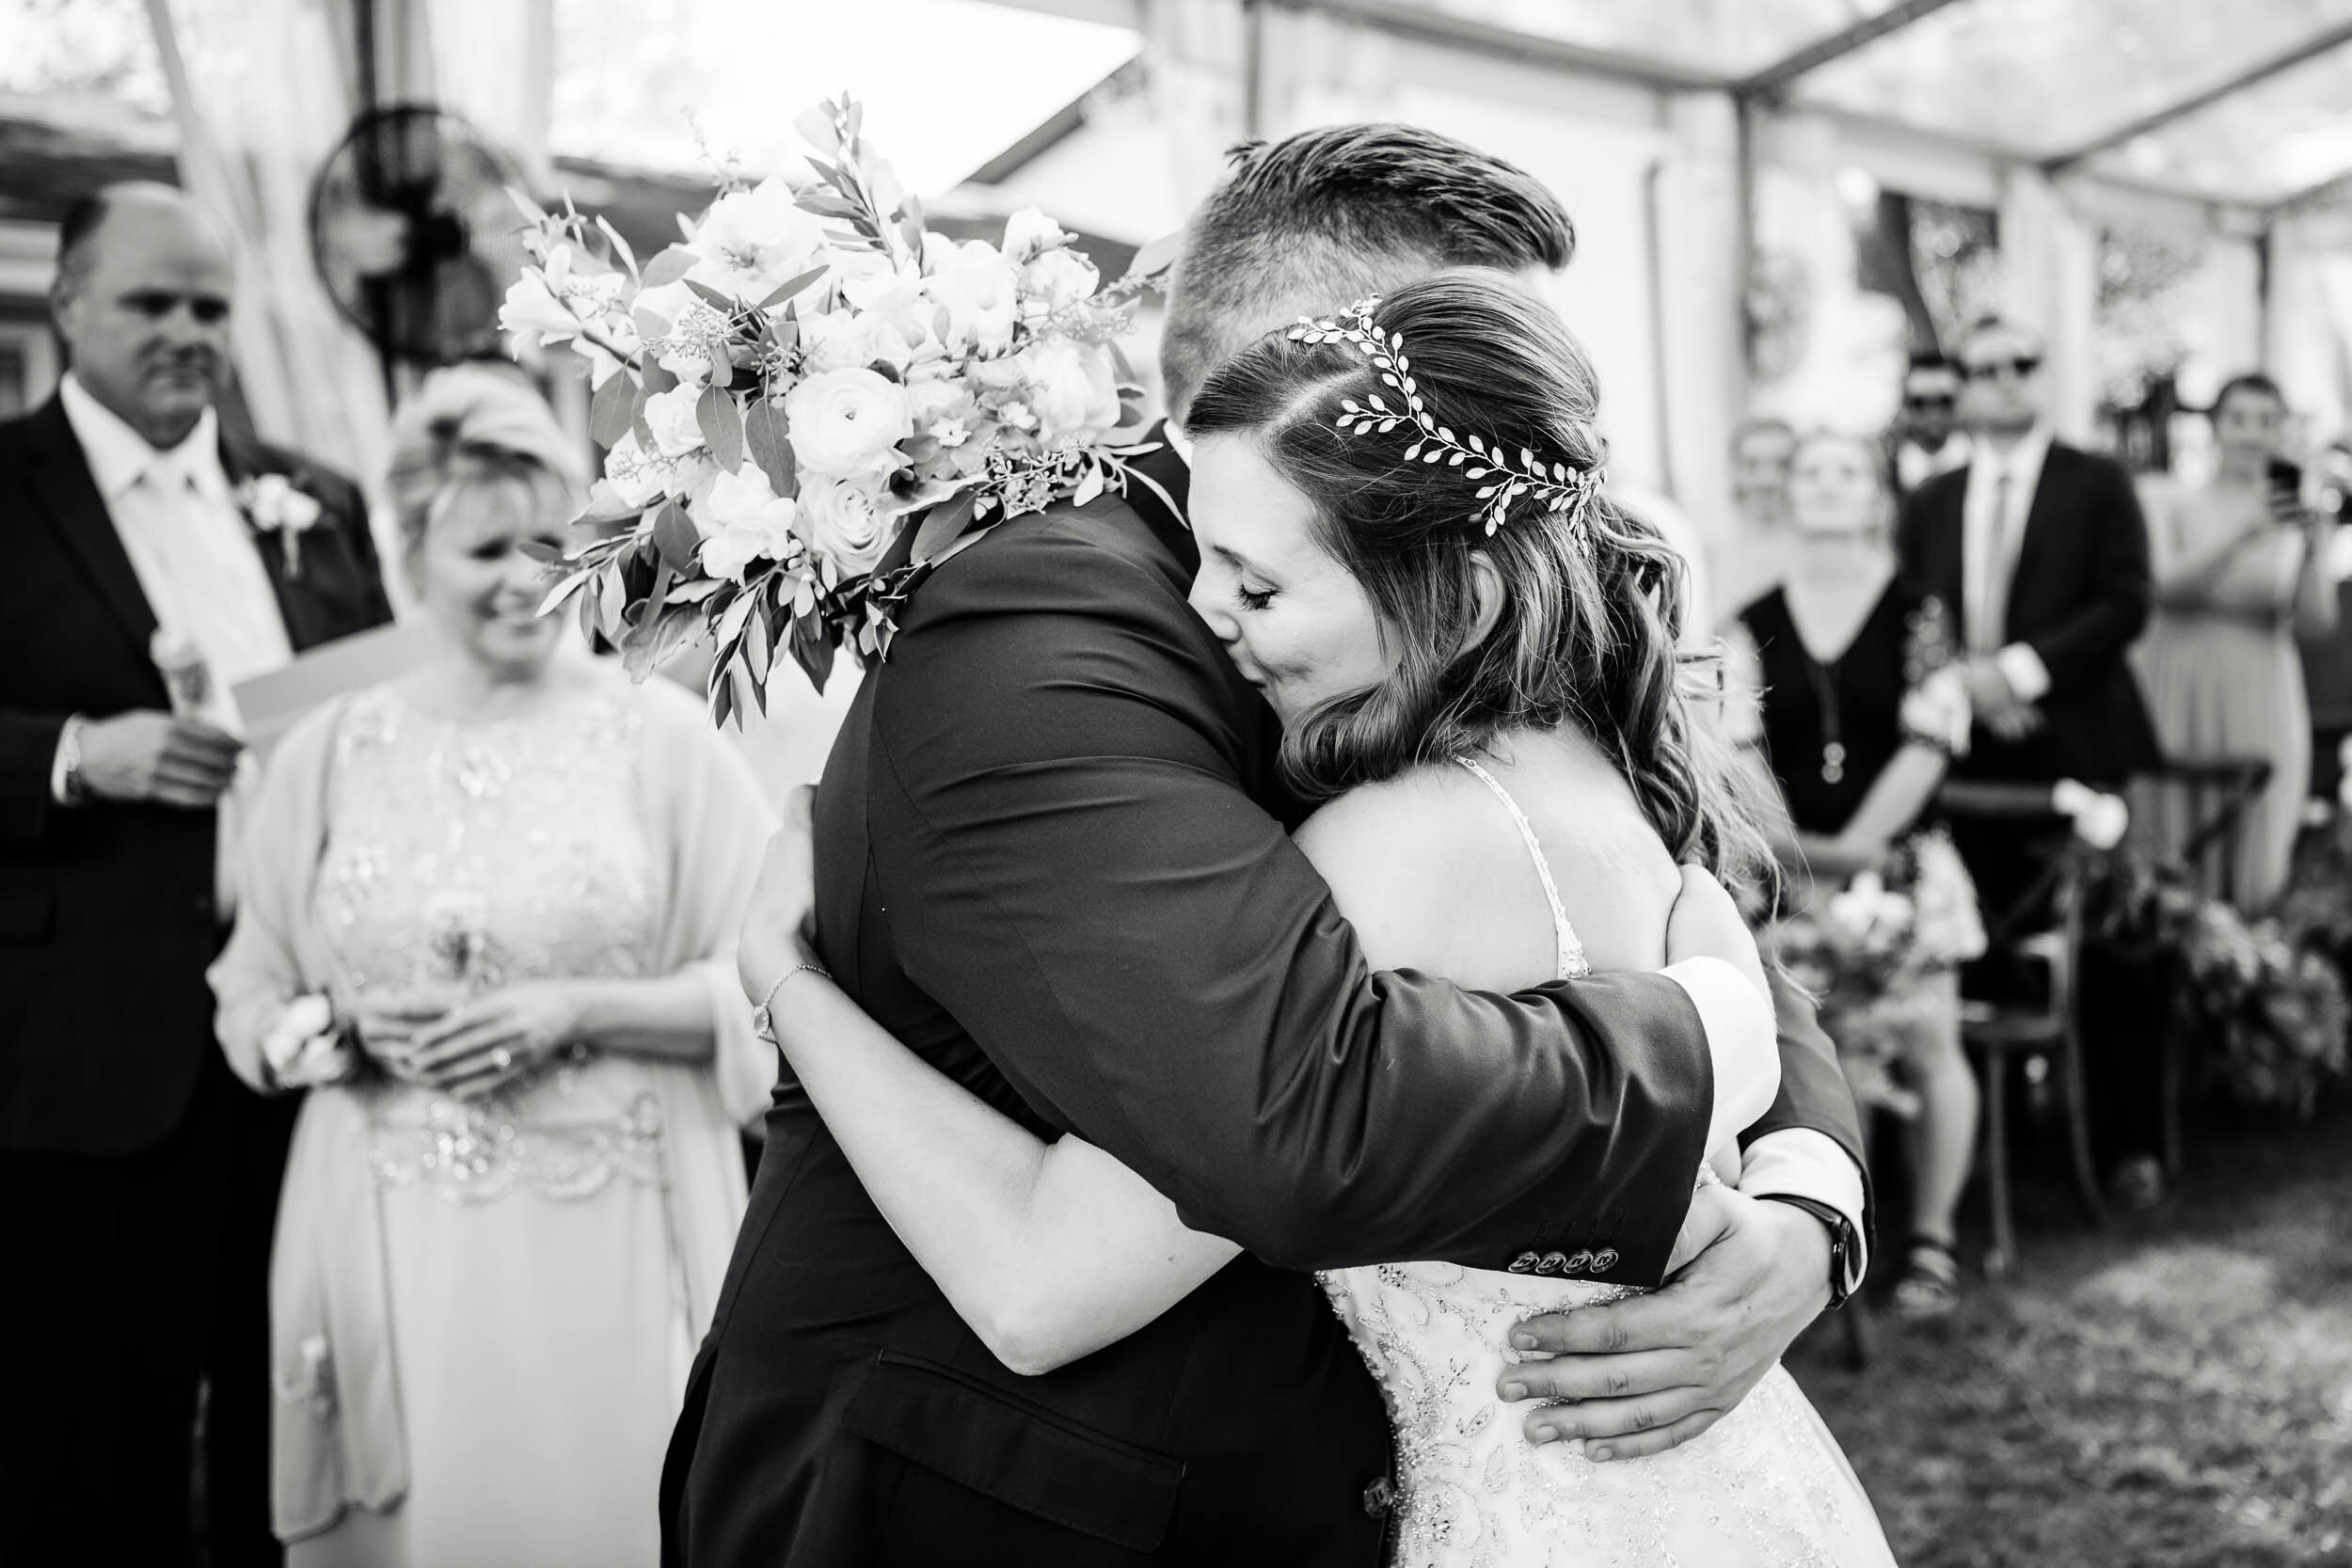 Bride and groom hug during their ceremony:  Chicago backyard wedding photographed by J. Brown Photography.